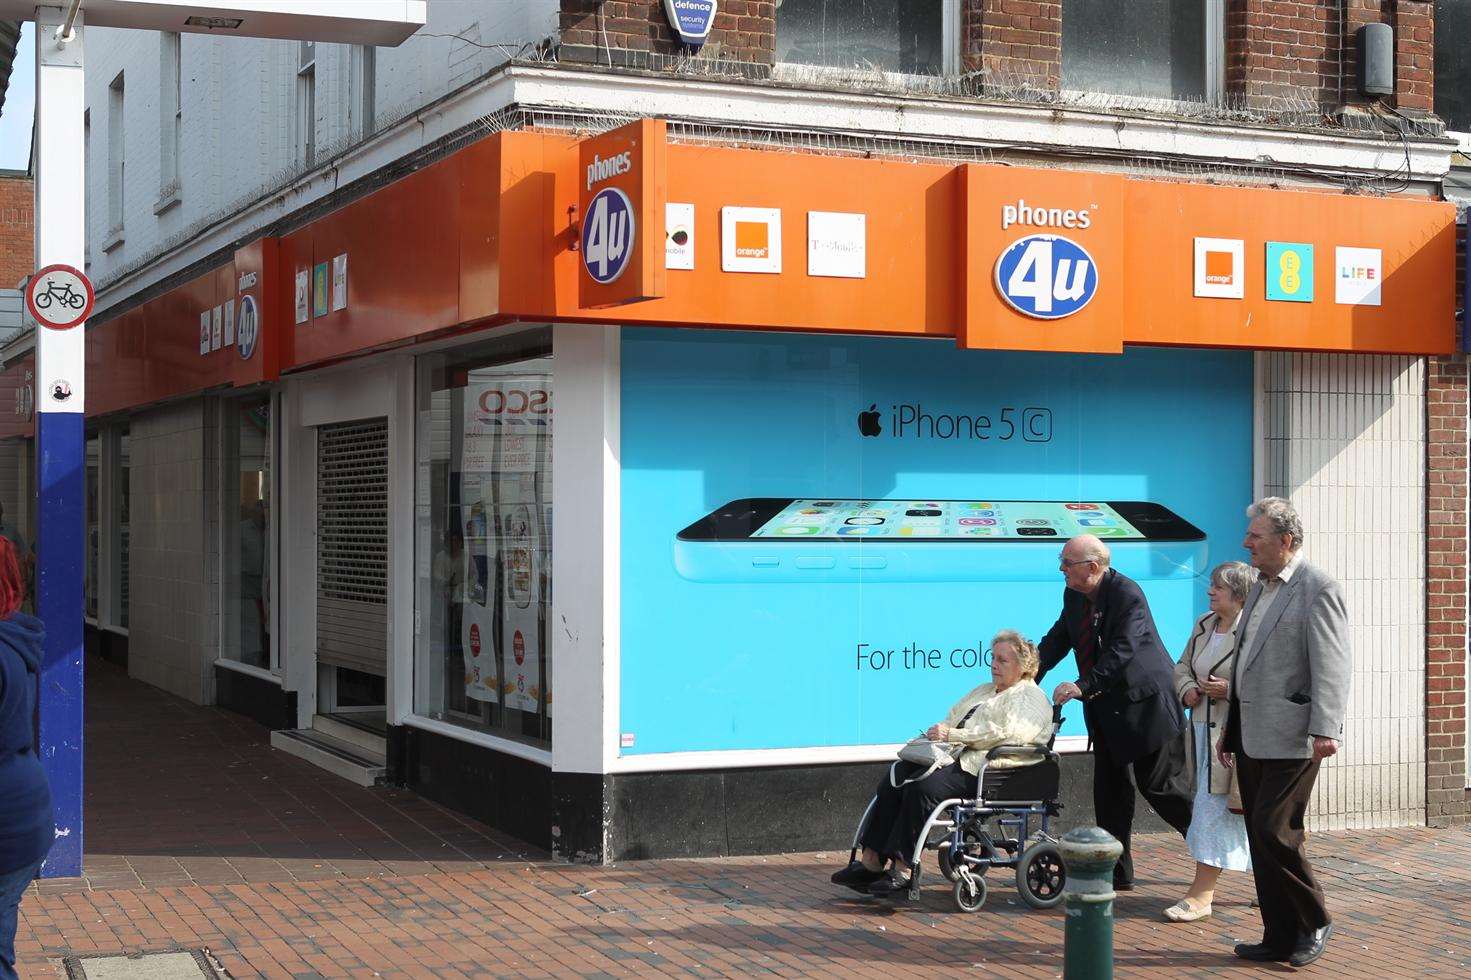 The Sittingbourne branch of Phones 4u will now reopen as a Vodafone